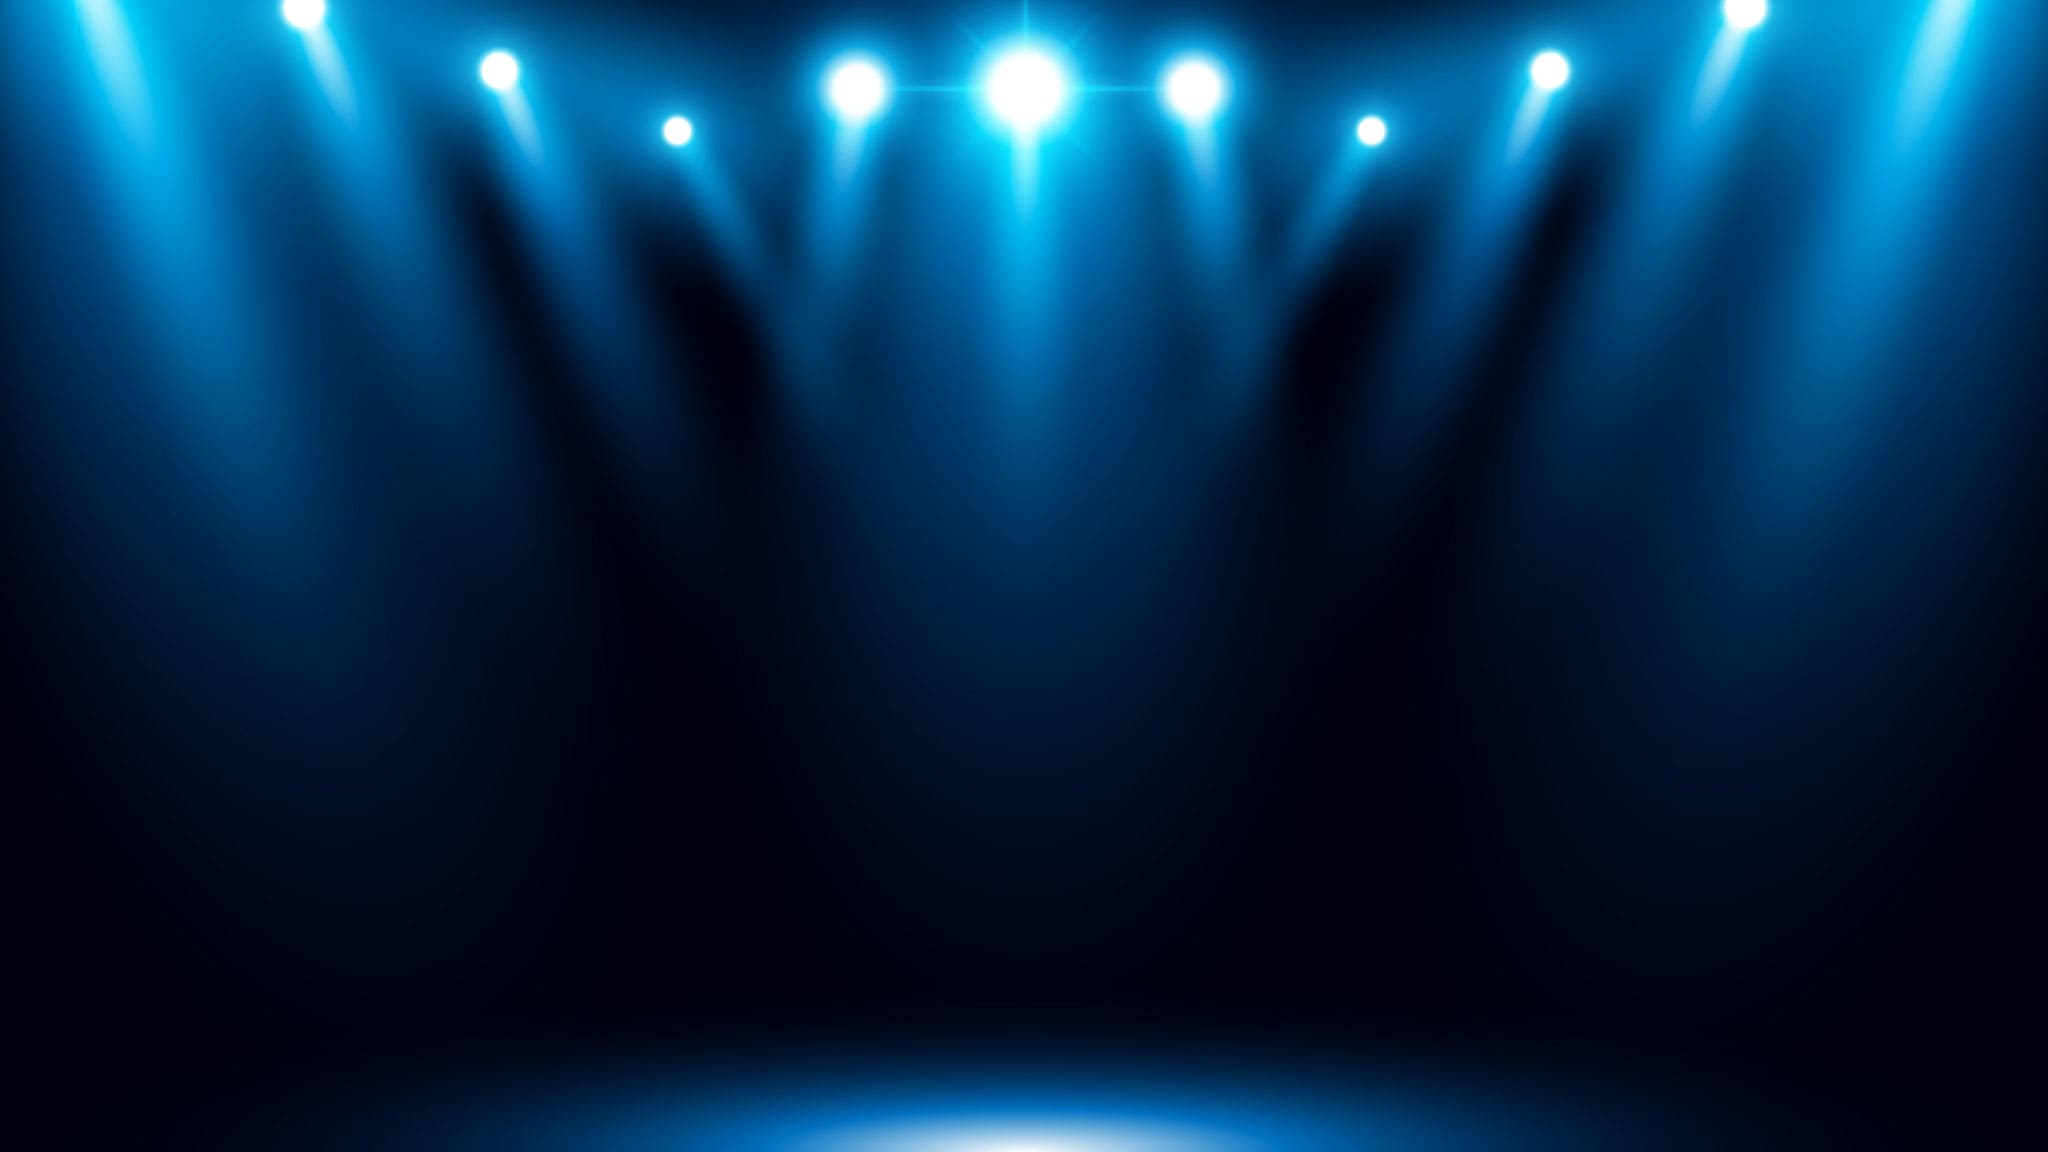 Blue lights shine into the blackness of an empty stage.